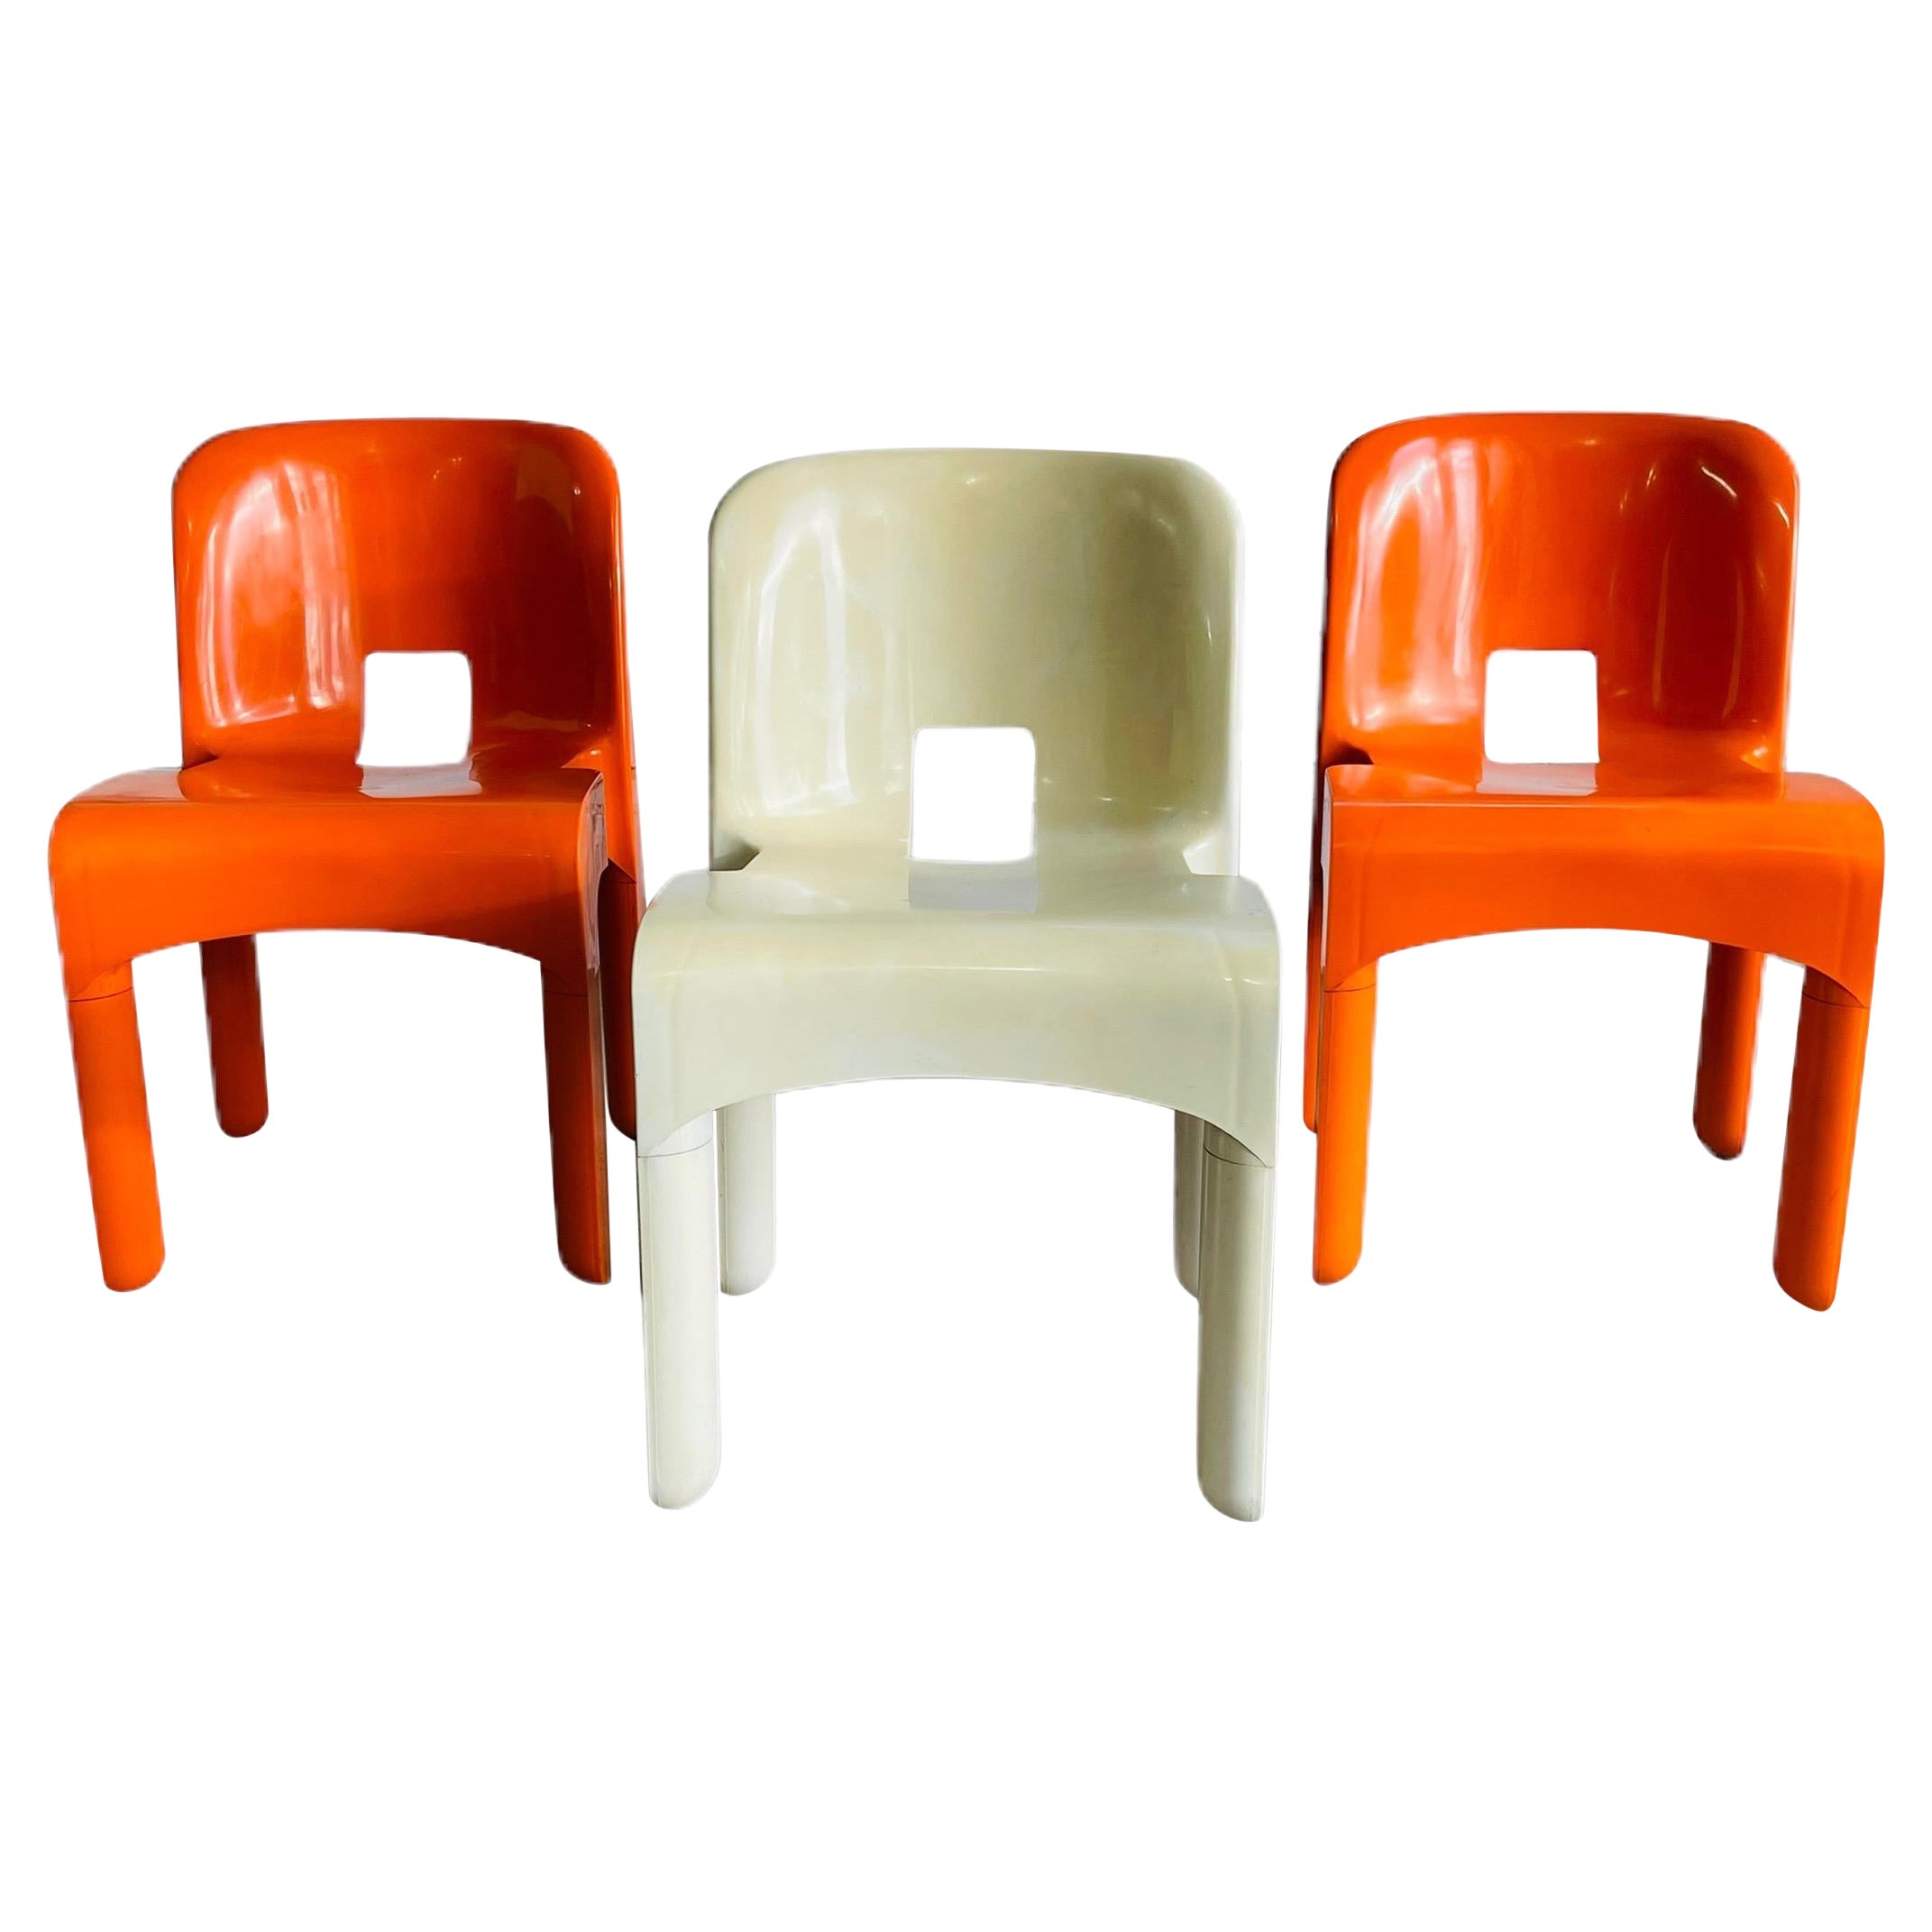 Set 3 Space Age Stacking Chairs by Joe Colombo 1967 Italy For Sale